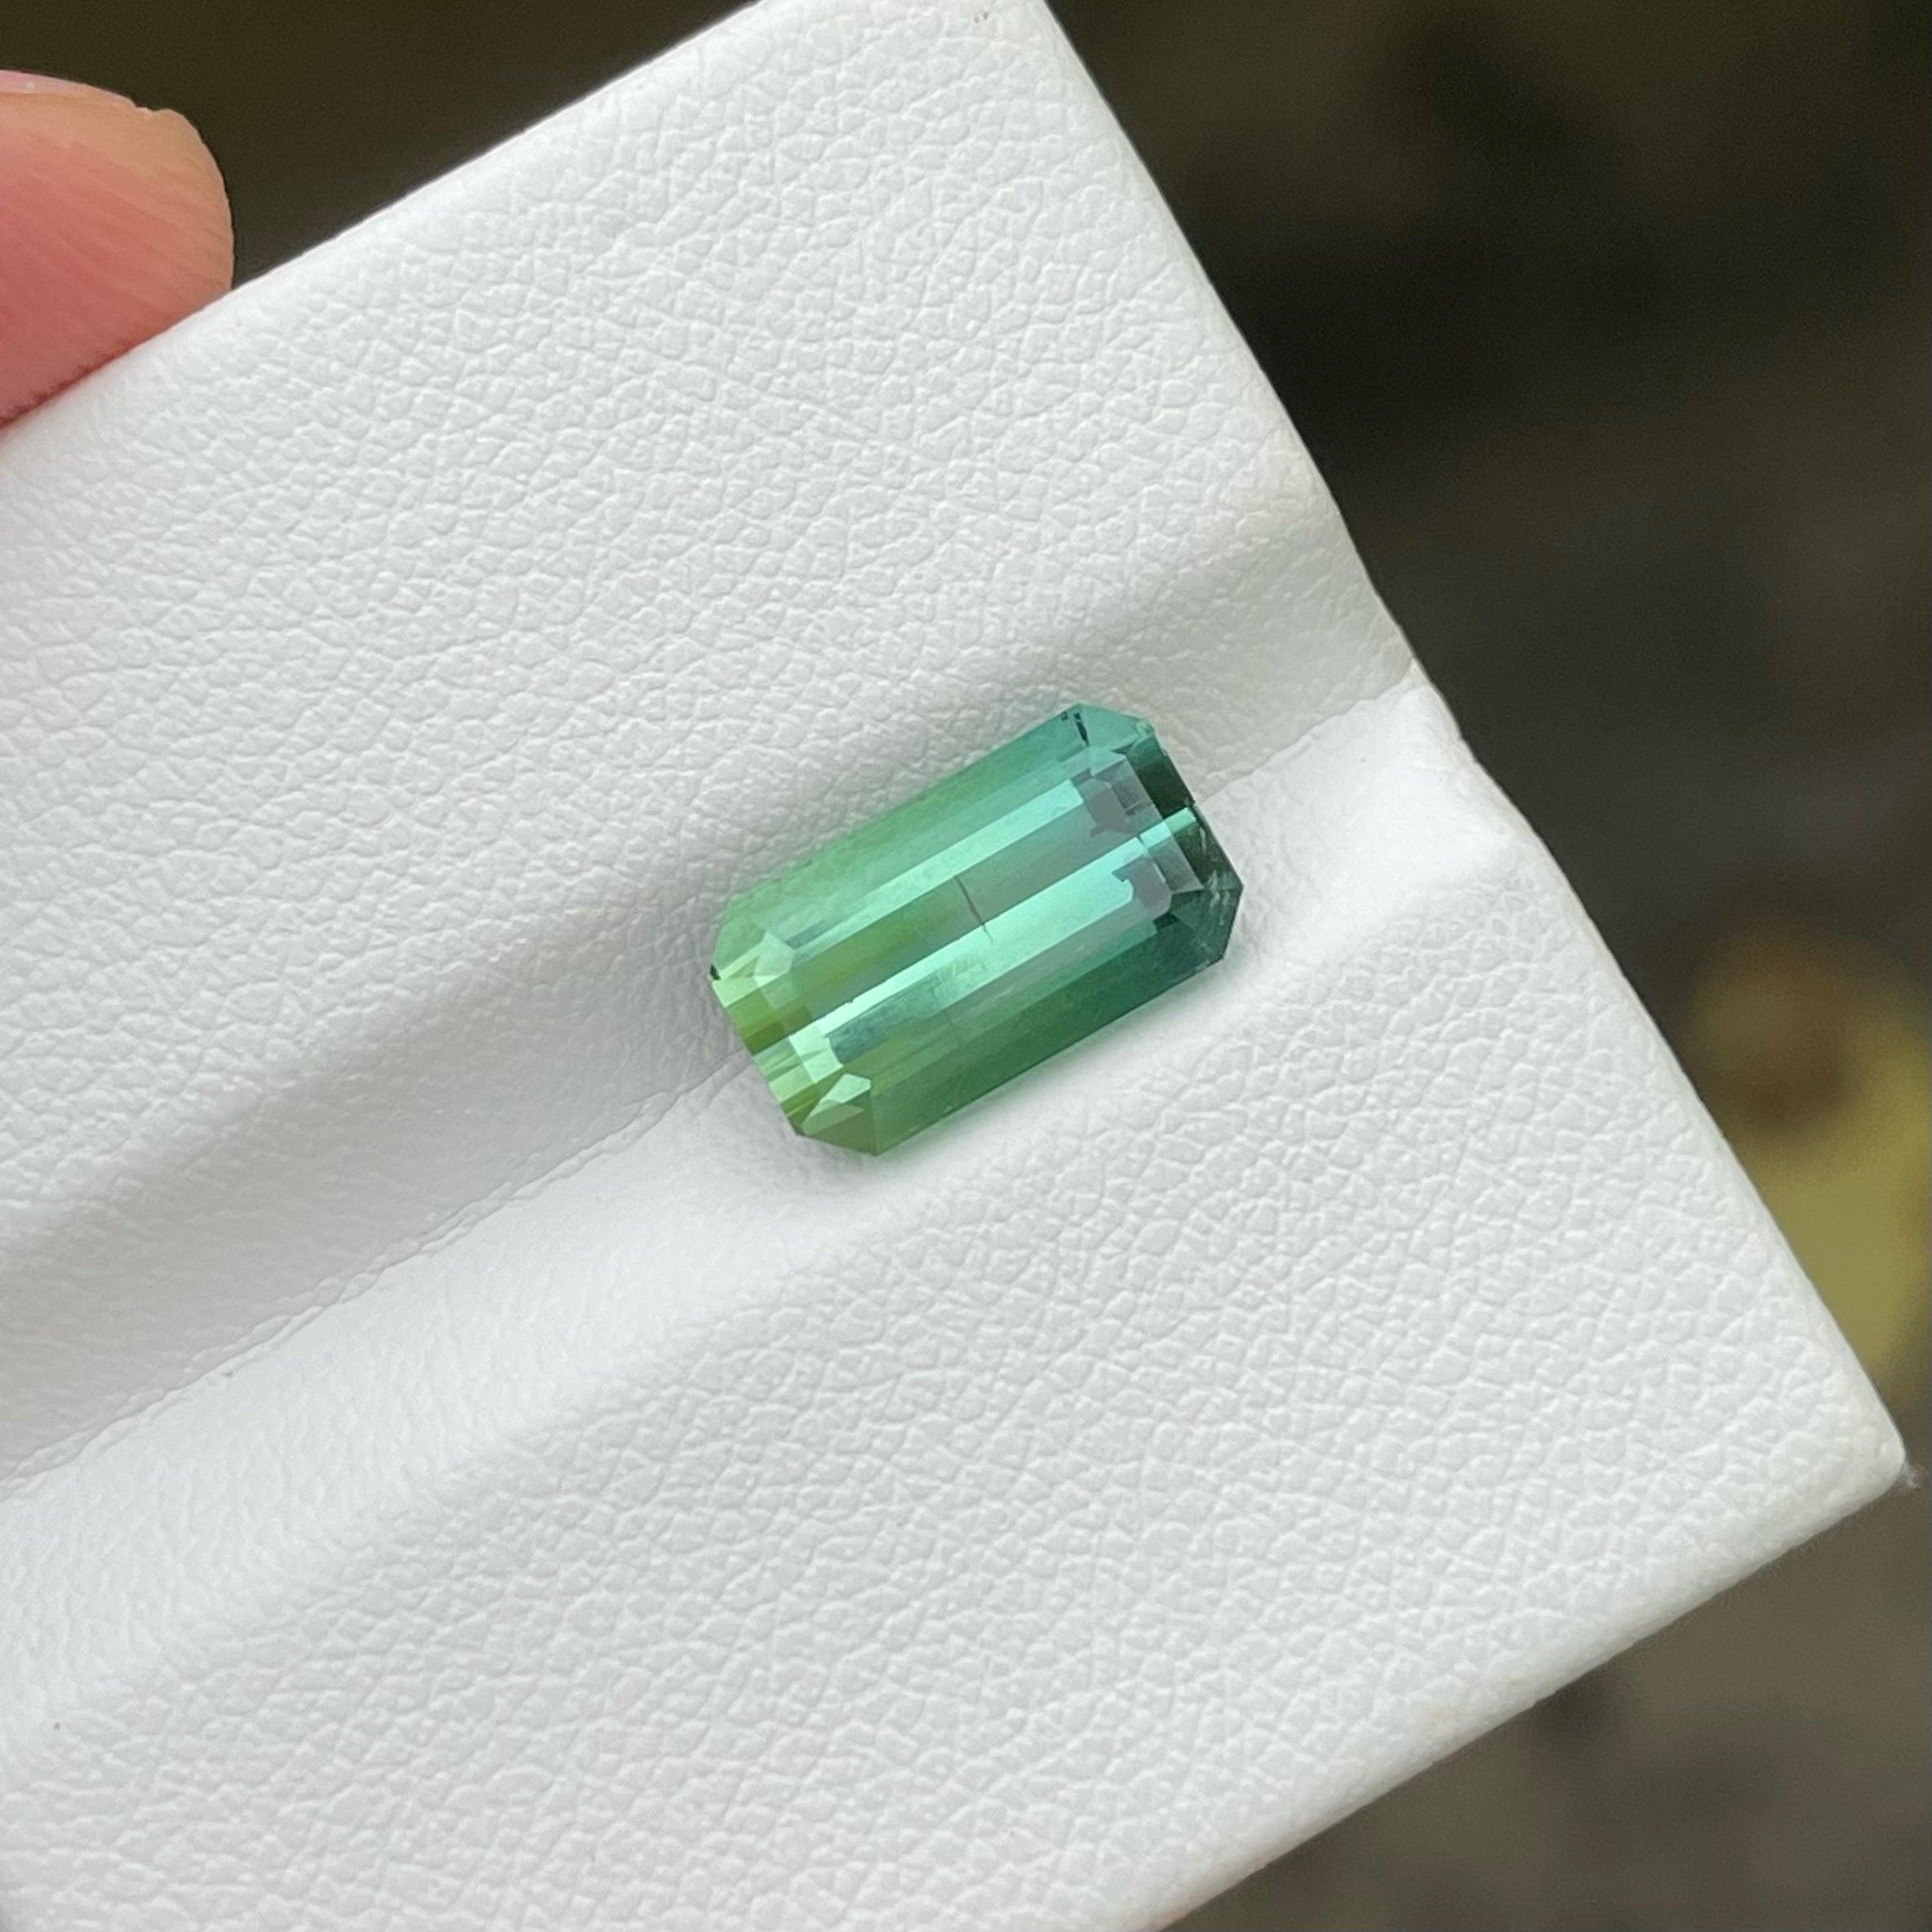 Natural Bicolor Tourmaline Stone of 3.80 carats from Afghanistan has a wonderful cut in a Octagon shape, incredible Greenish Blue Color. Great brilliance. This gem is  Vvs Clarity.

Product Information:
GEMSTONE: TYPE	Natural Bicolor Tourmaline